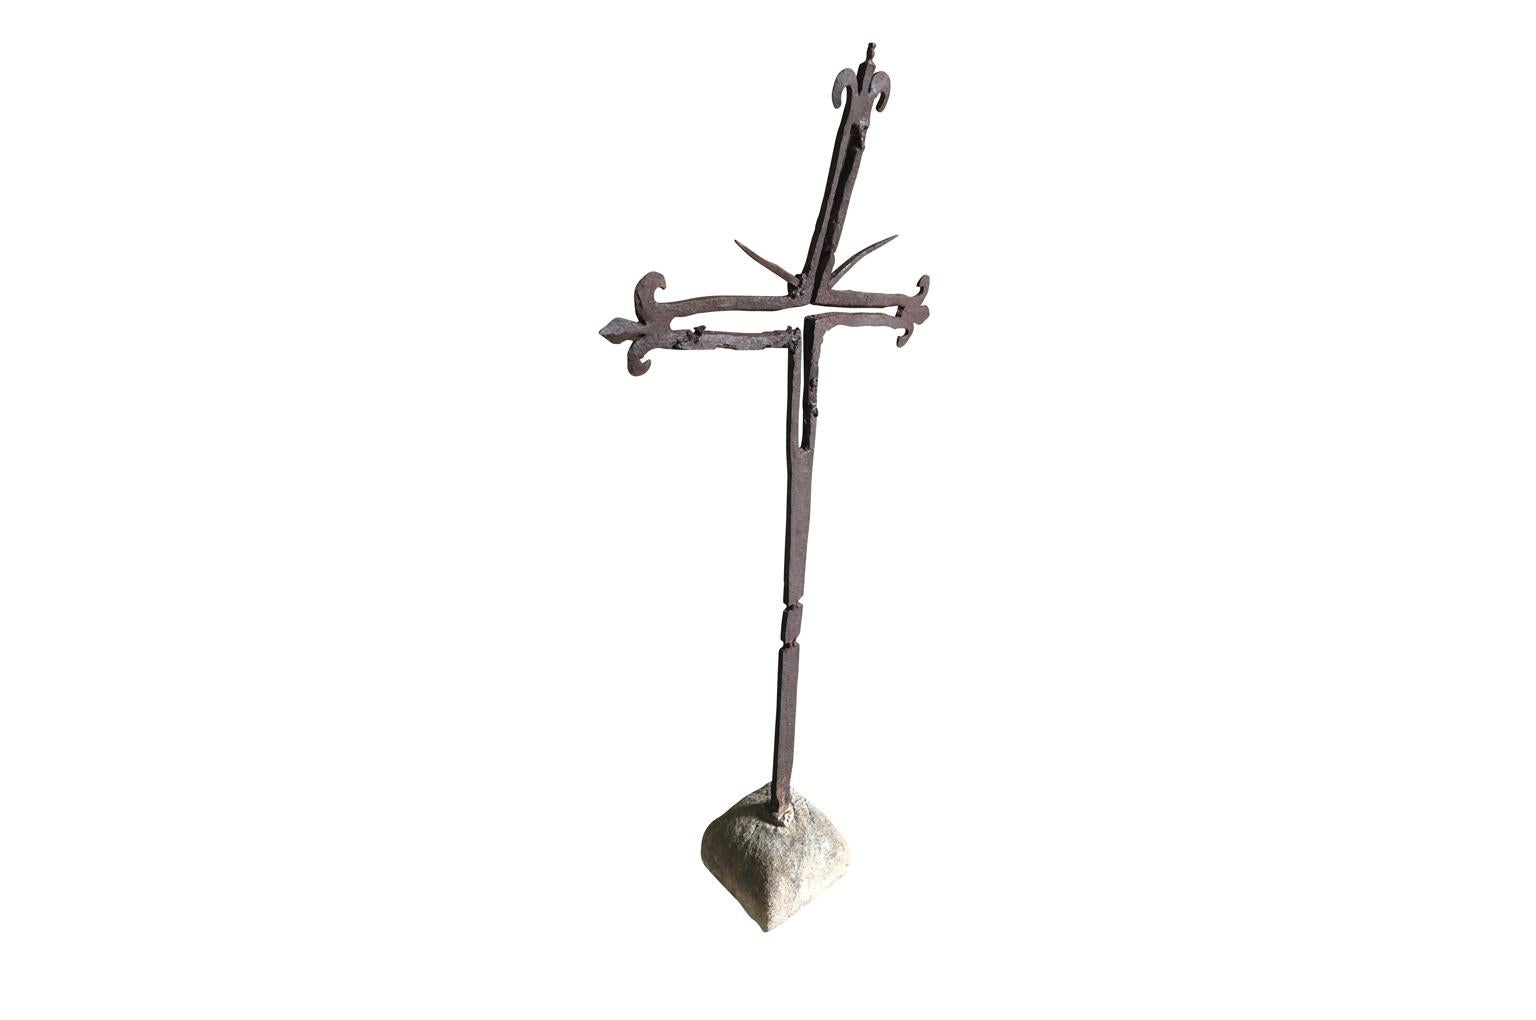 A simply beautiful 17th century cross from the Catalan region of Spain. Constructed from hand forged iron, resting in its stone base. A wonderful accent piece for any interior or exterior.